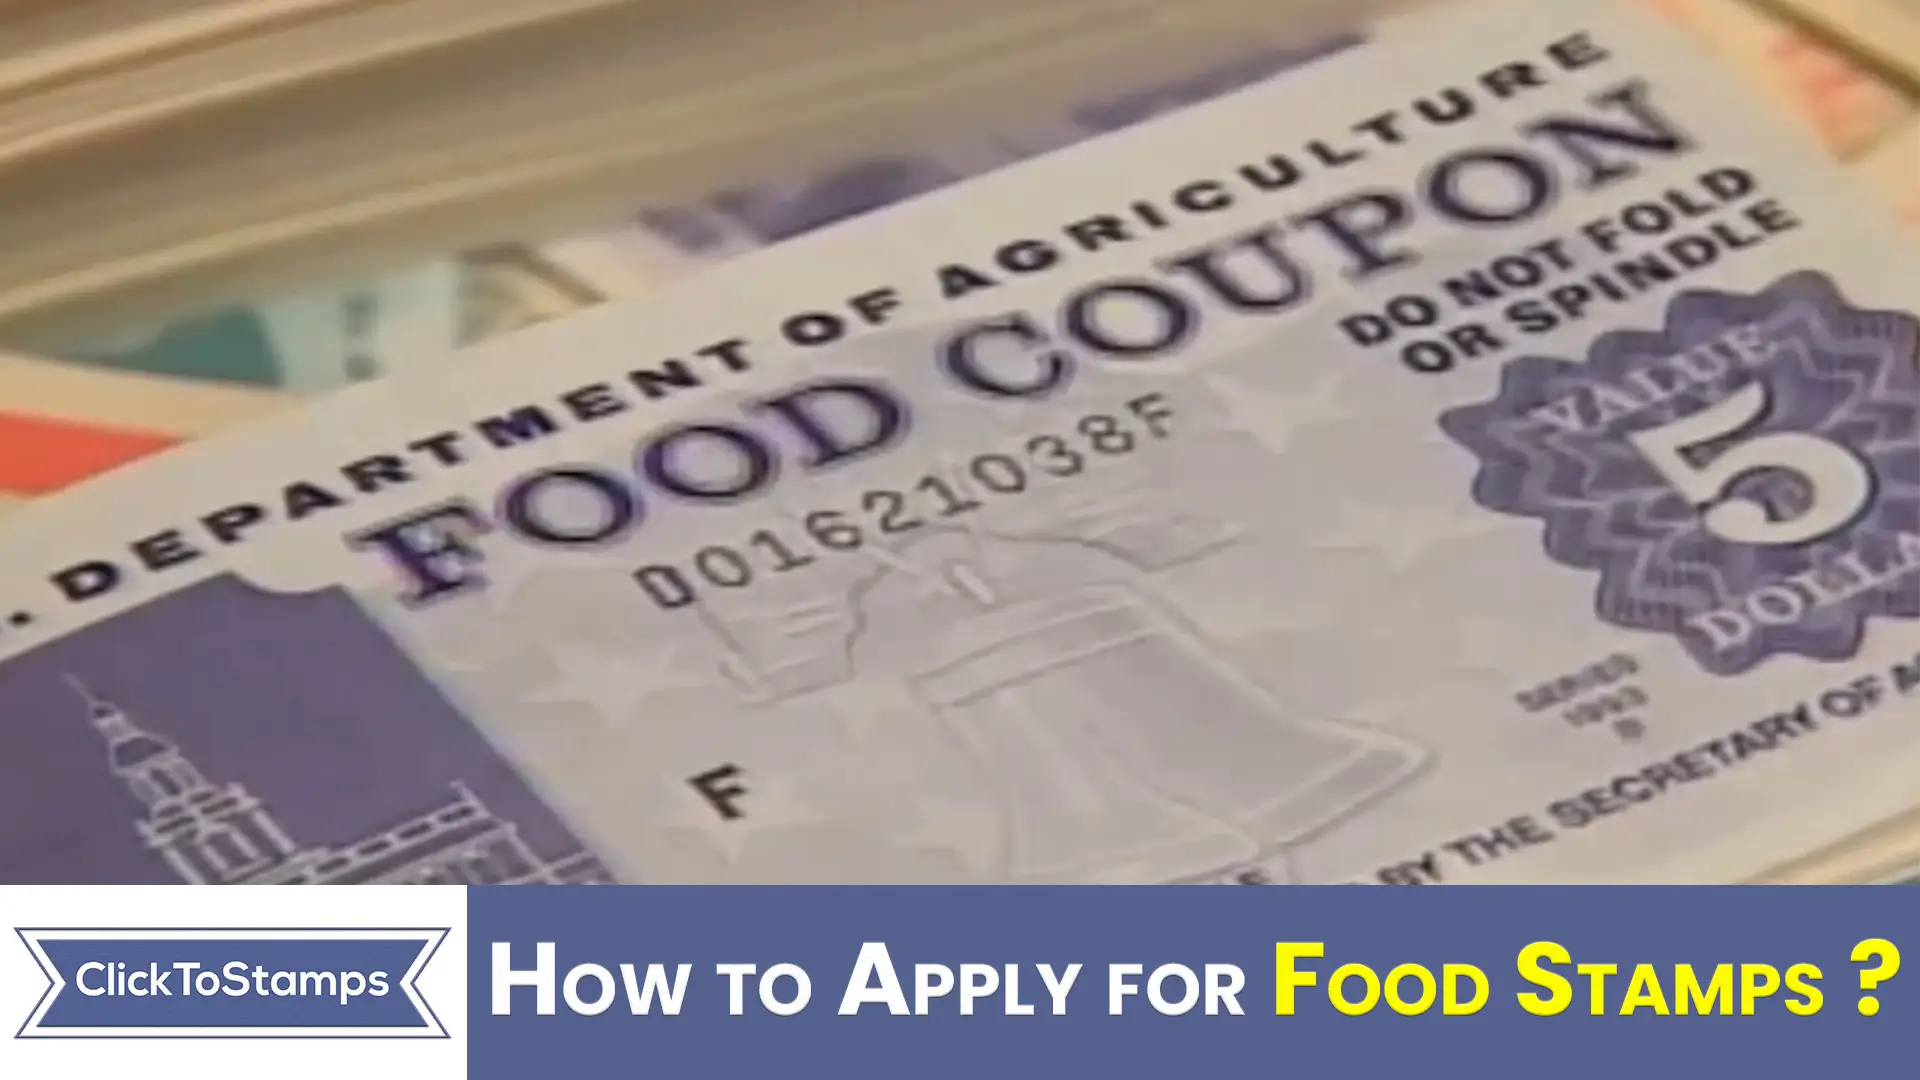 How to Apply for Food Stamps